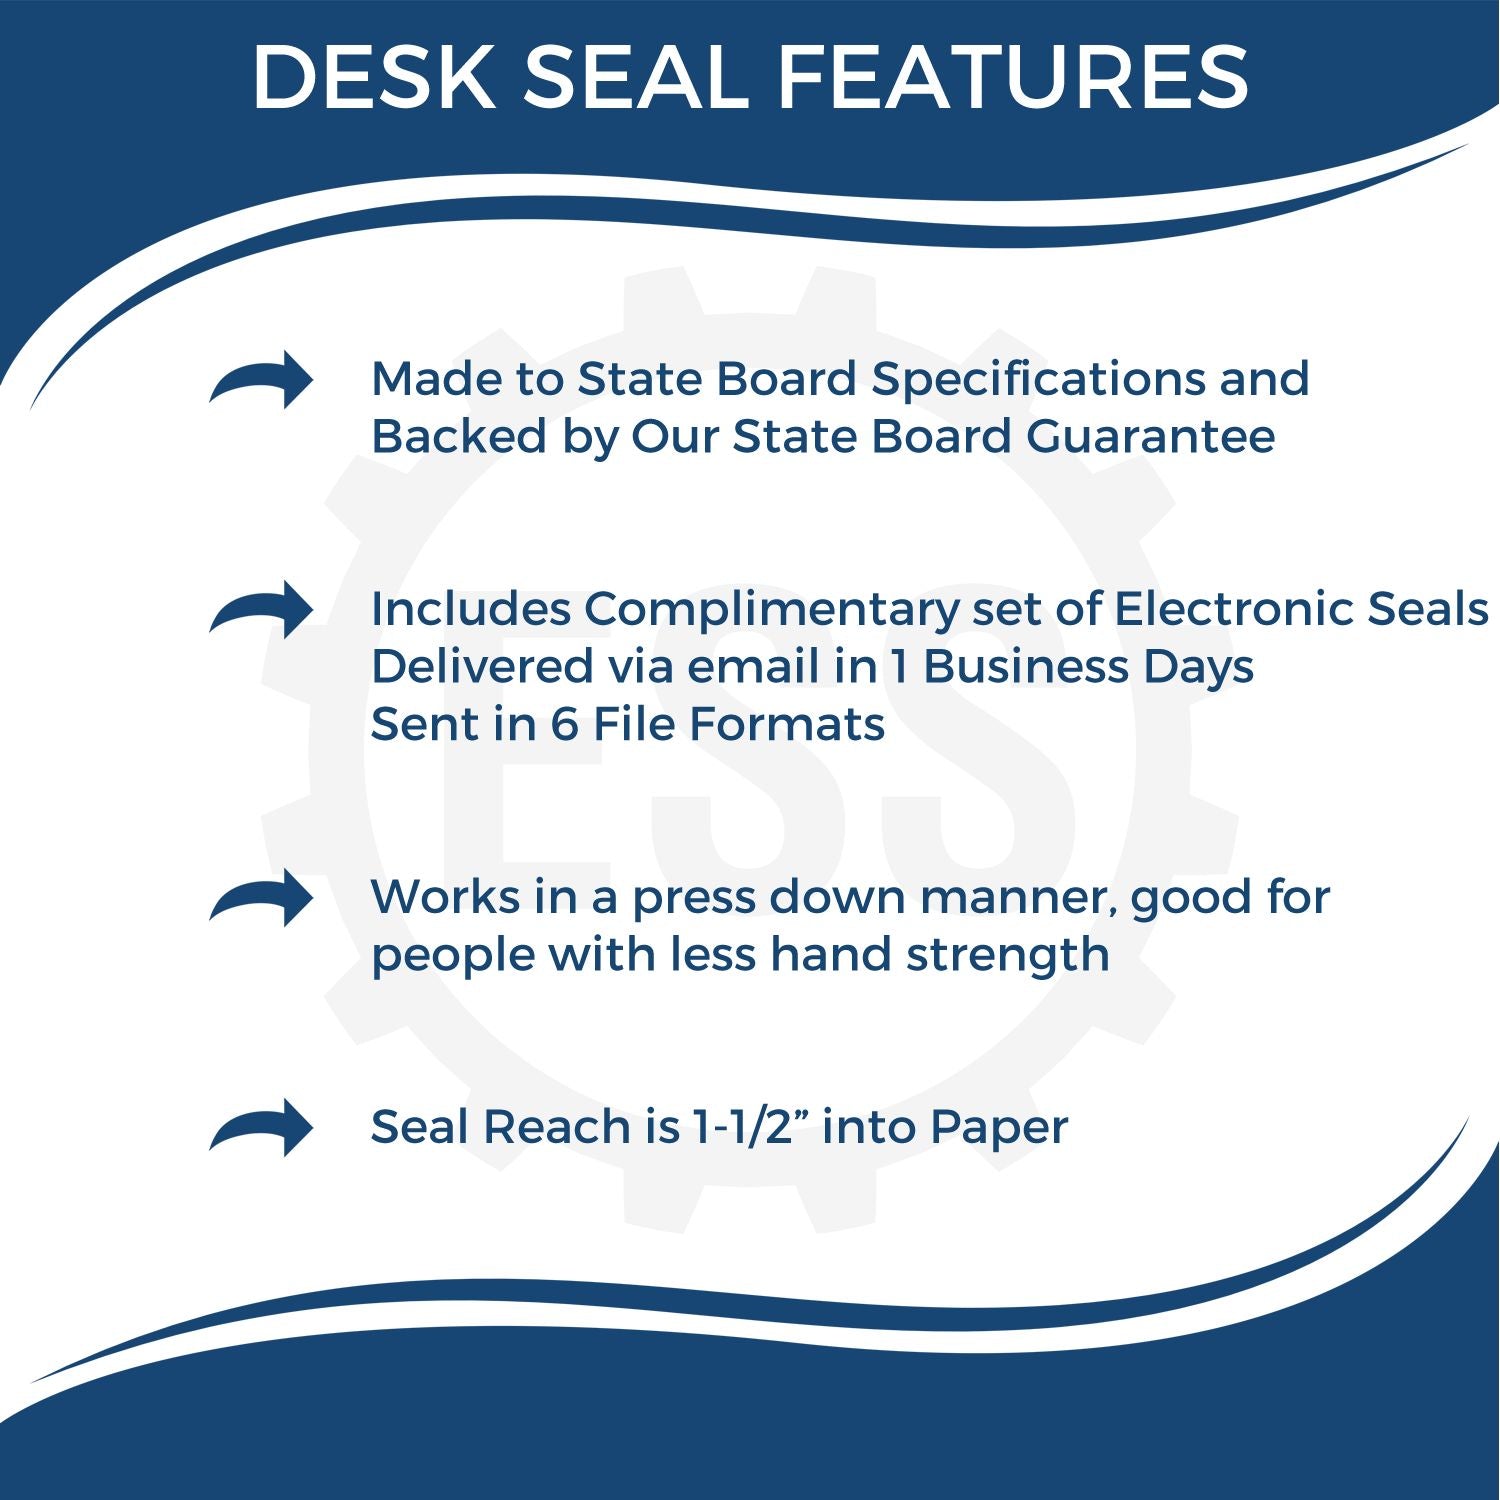 A picture of an infographic highlighting the selling points for the Kentucky Desk Landscape Architectural Seal Embosser